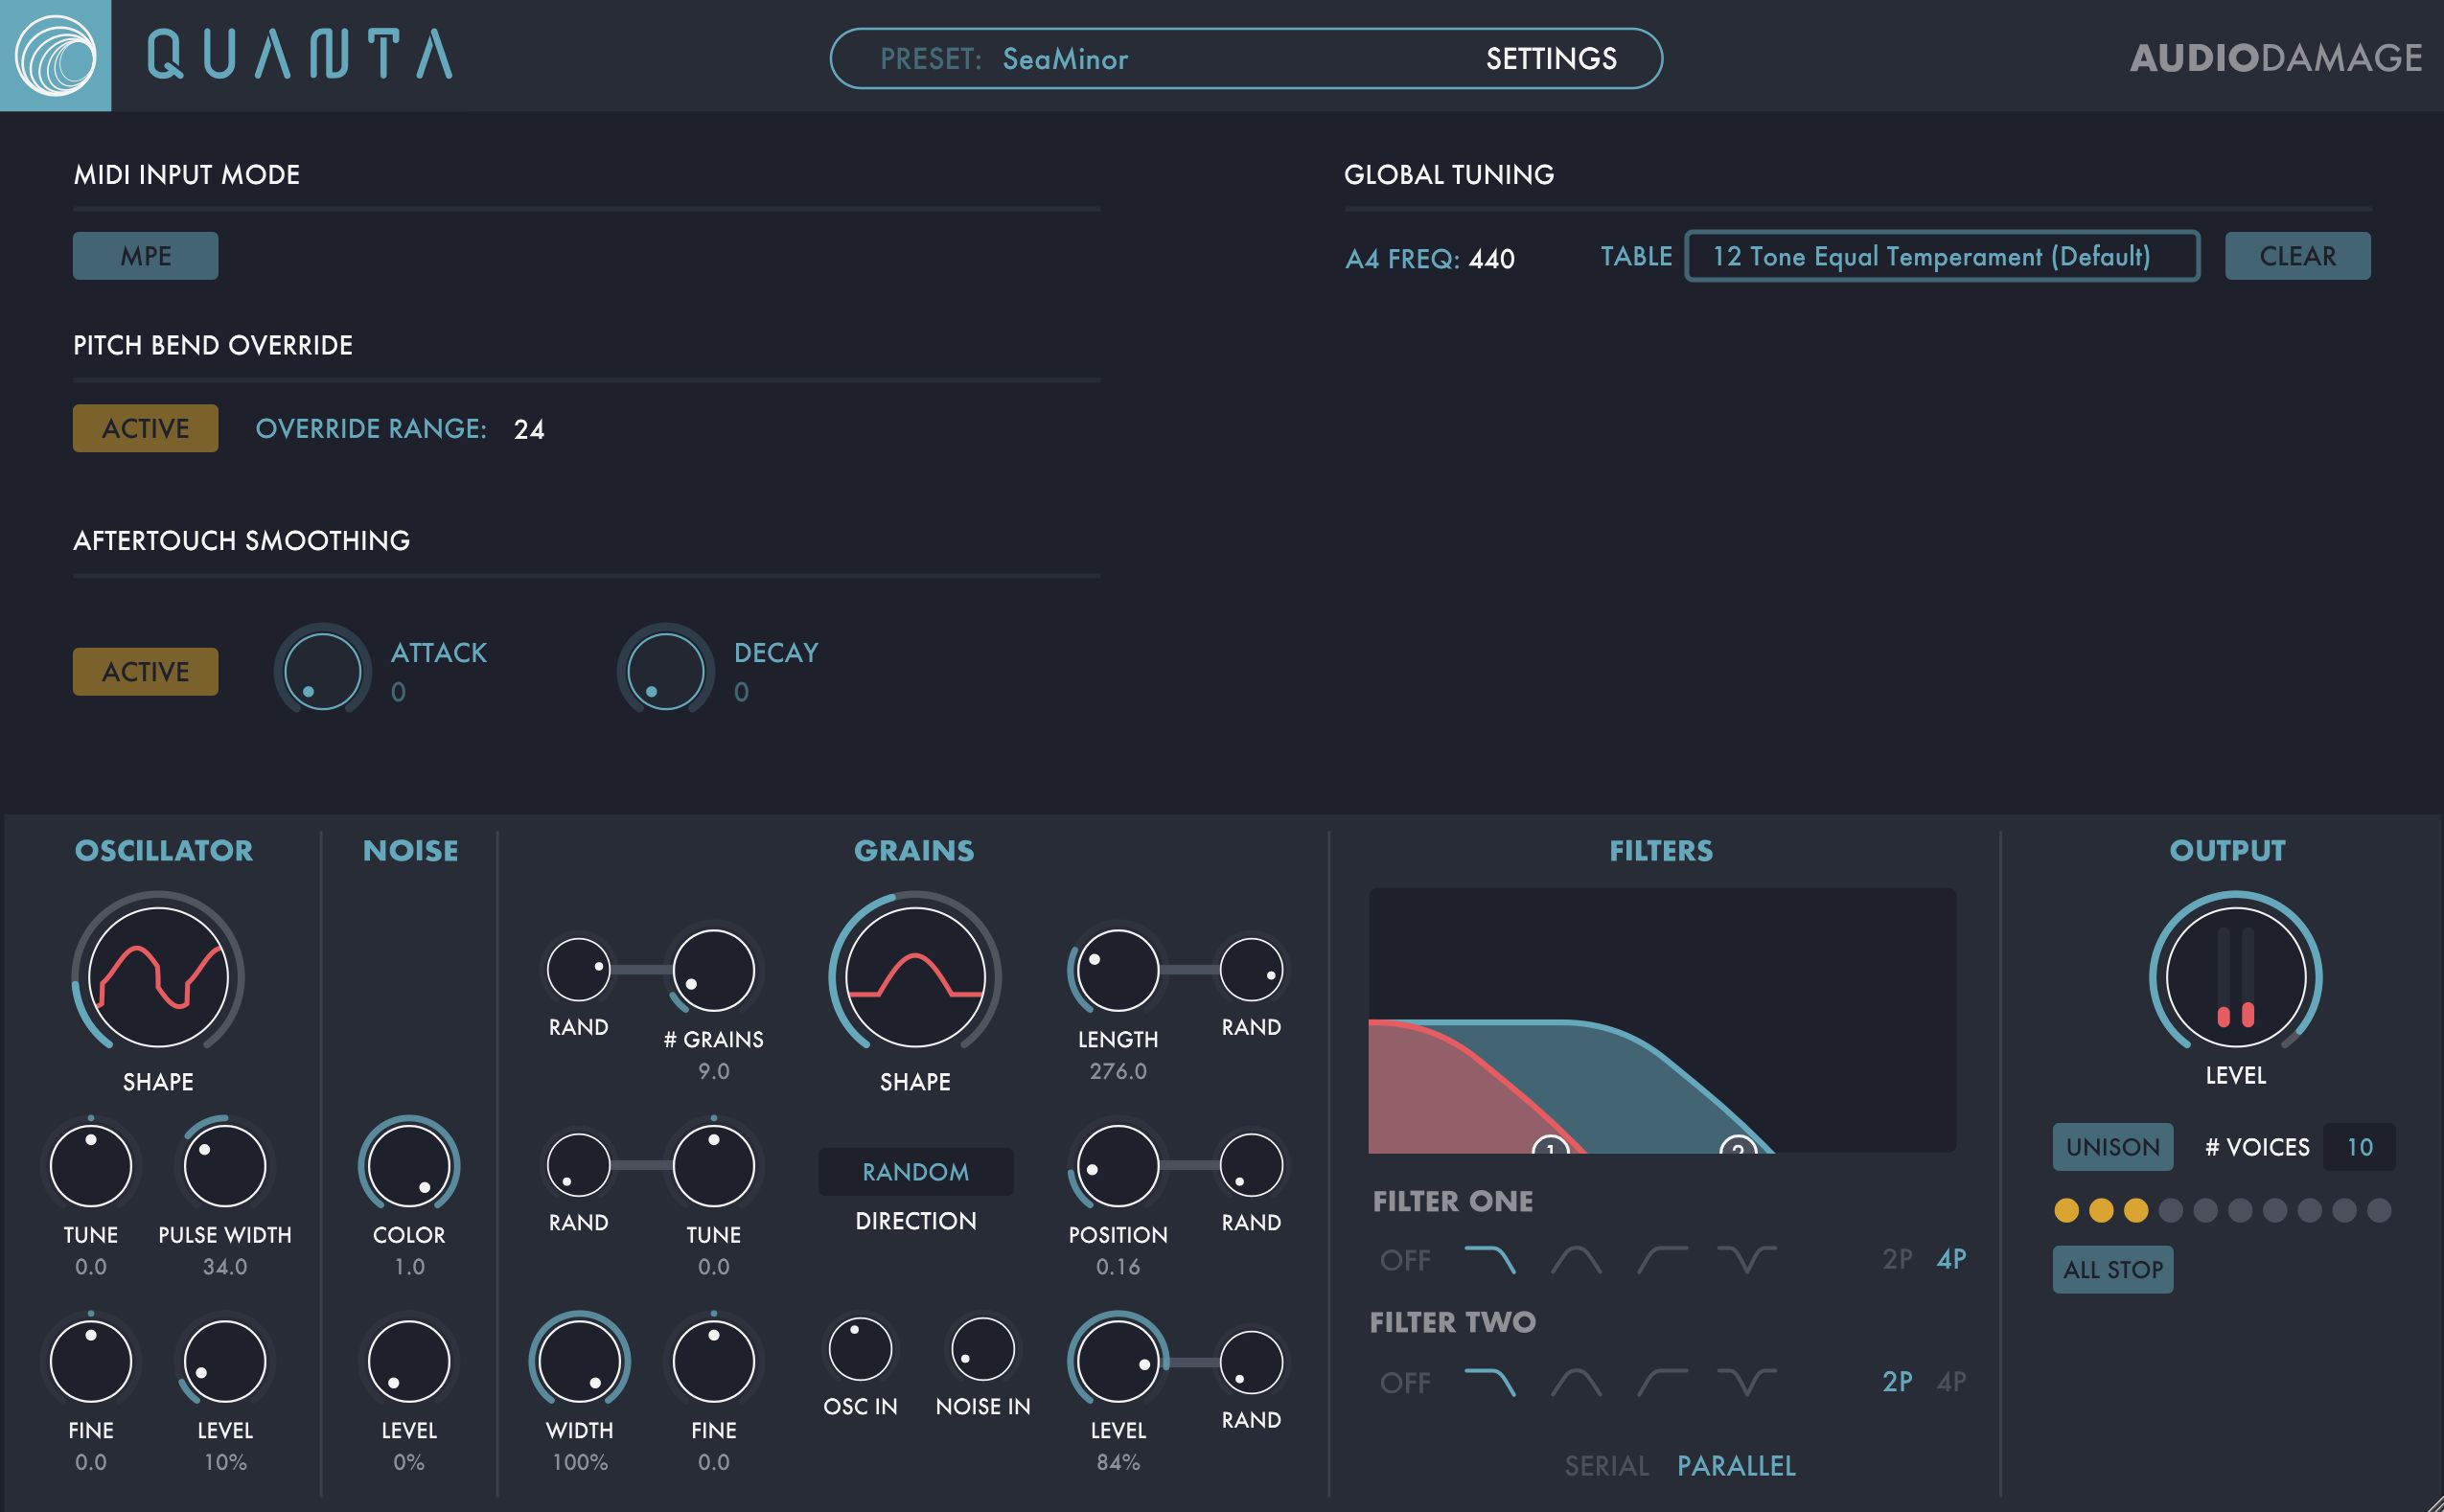 Quanta’s global Settings include optional MPE MIDI input, Aftertouch smoothing, and alternate tunings